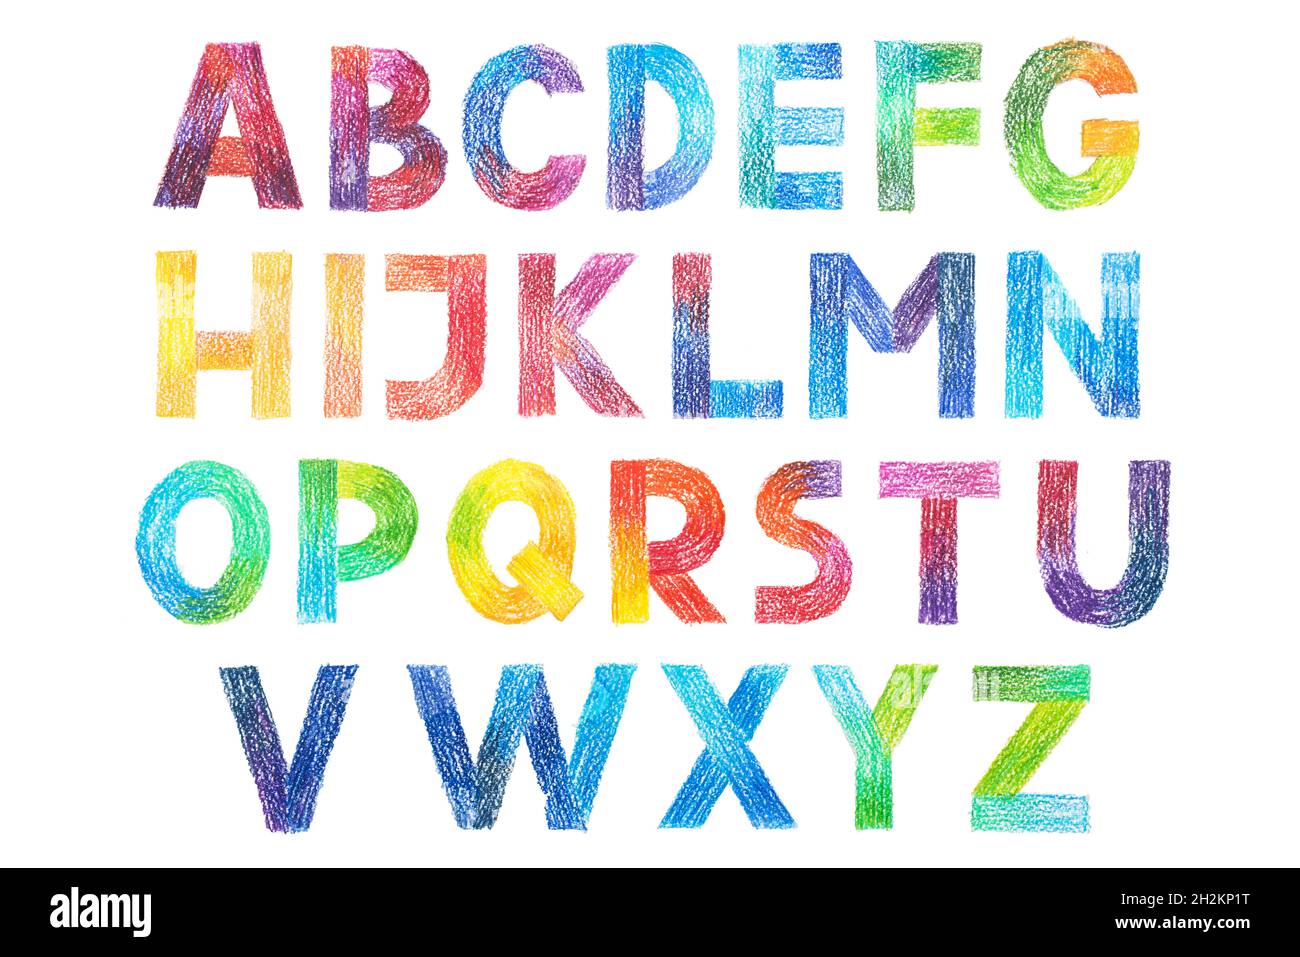 Sans Serif Gothic Grotesk alphabet drawing in color pencils. Stock Photo